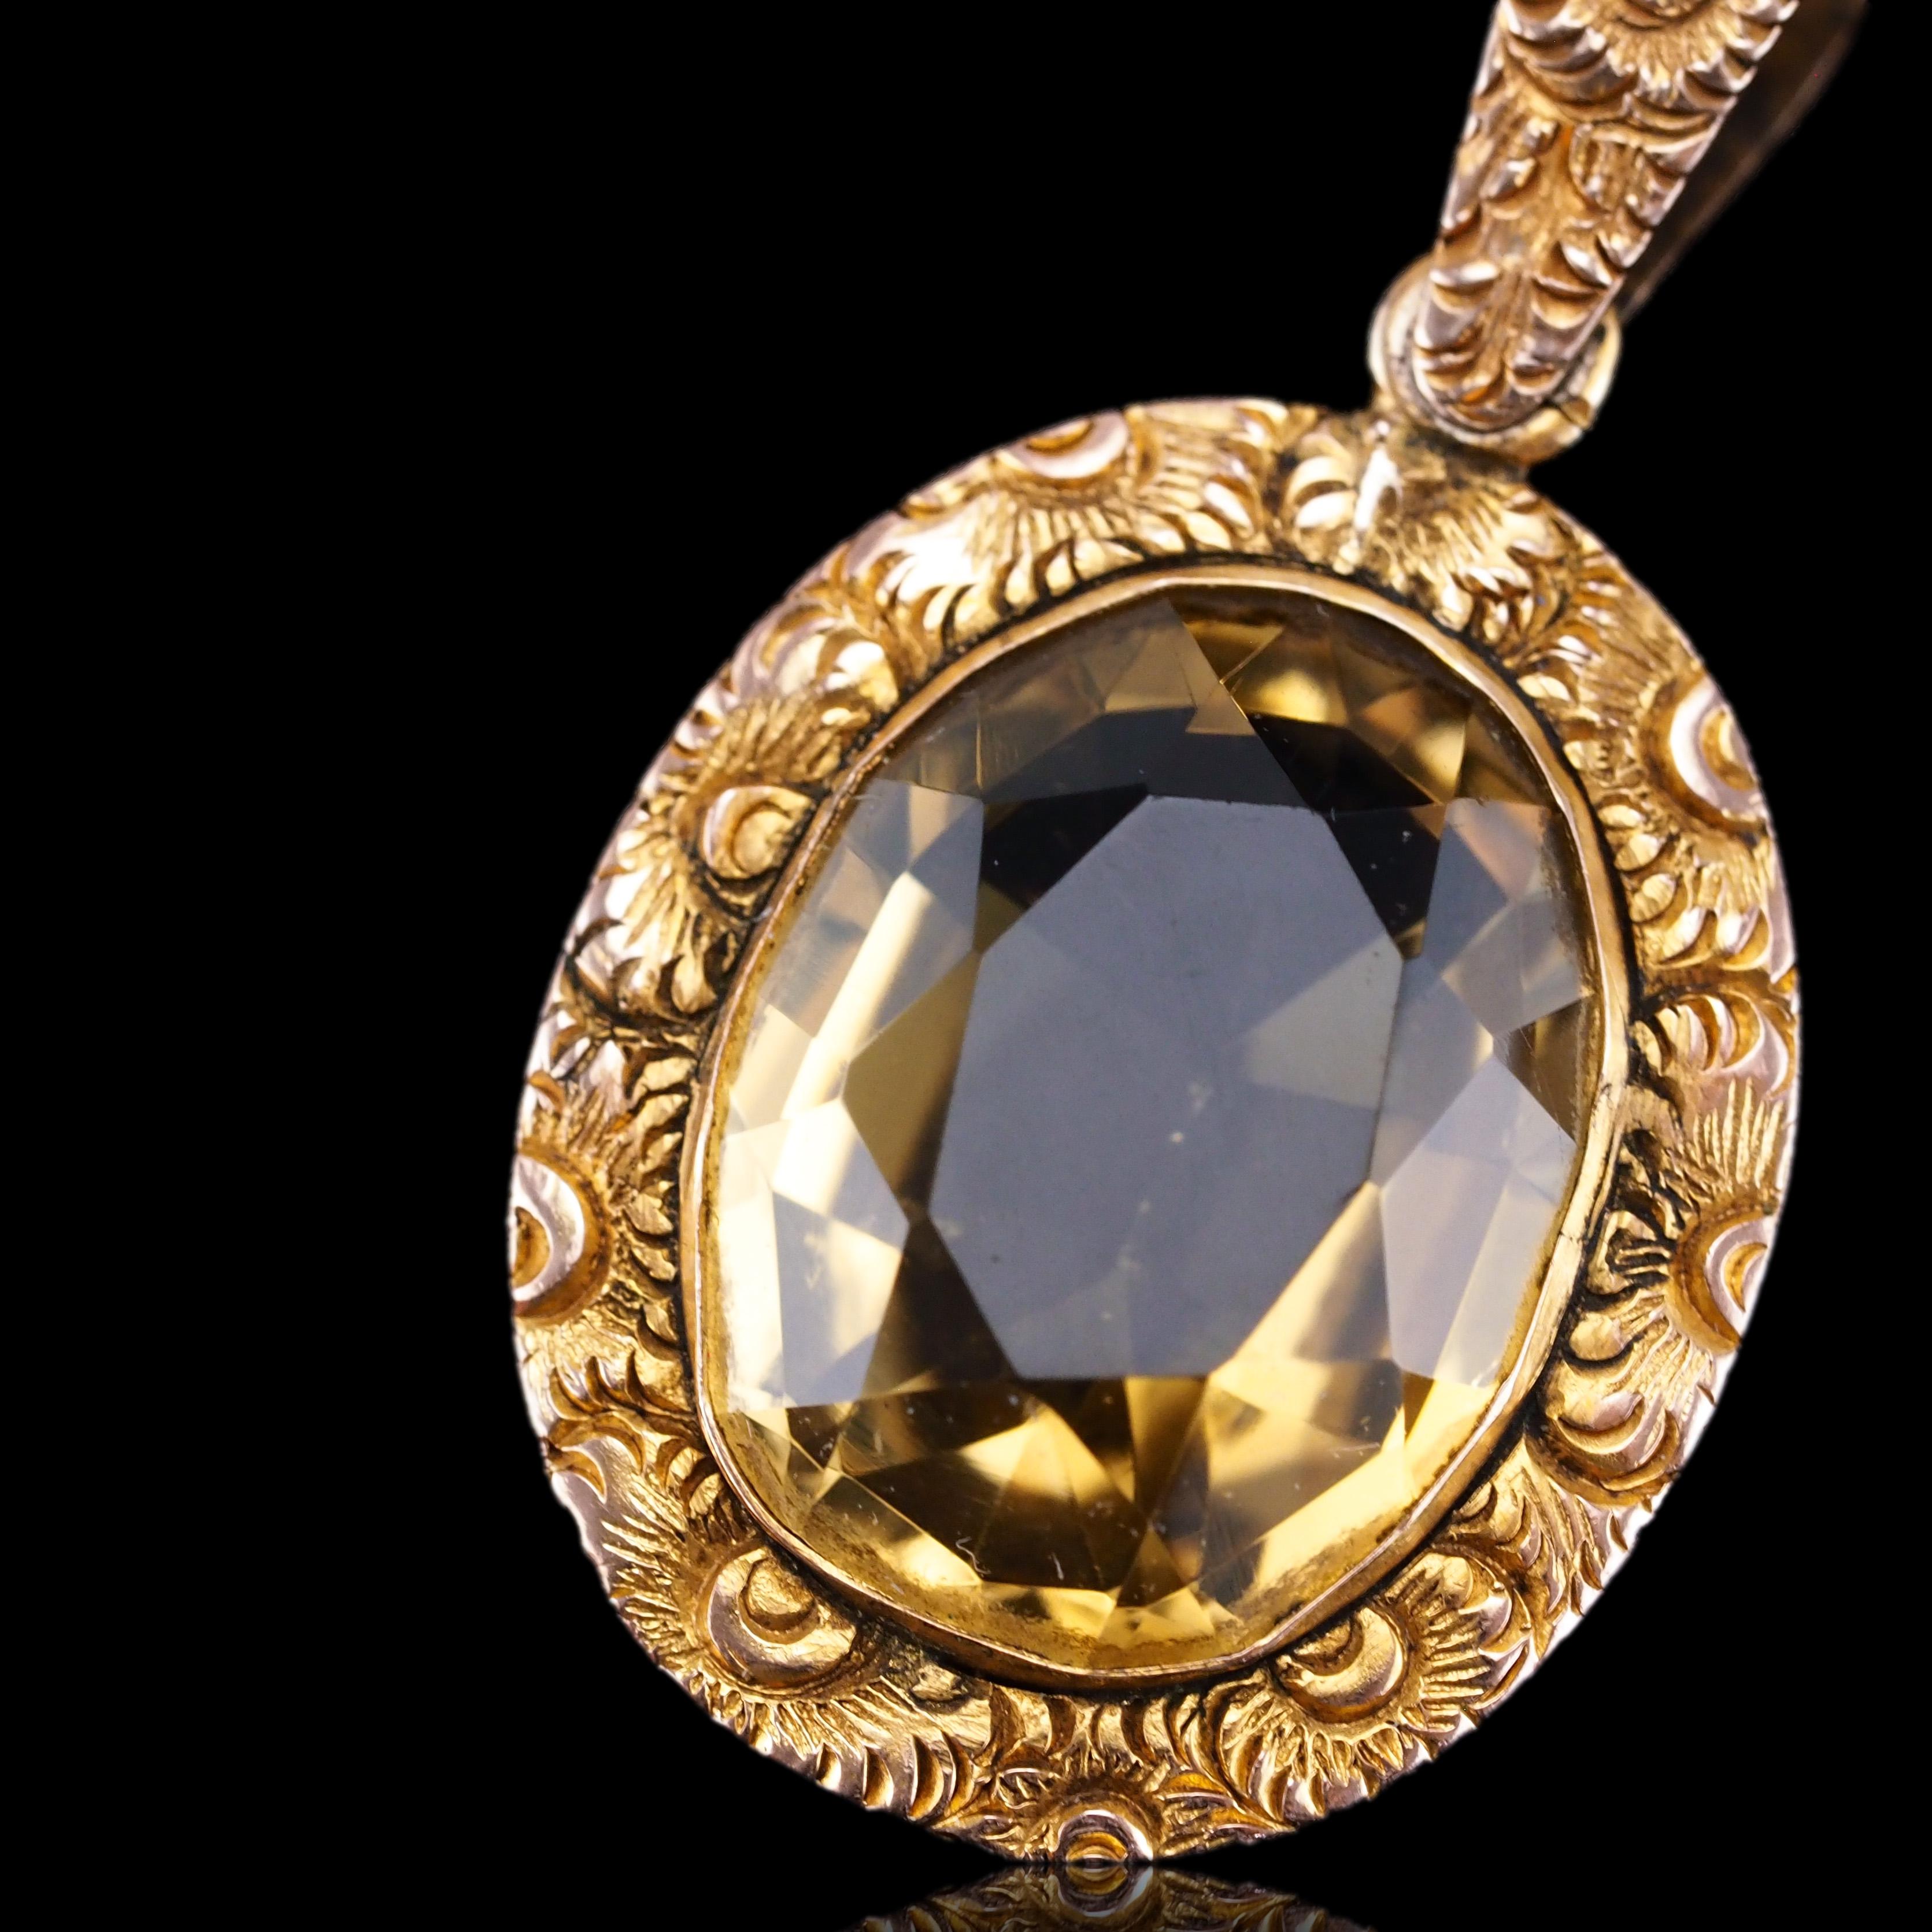 Antique Victorian Citrine Necklace with Chased Floral Pendant 9K Gold c.1850 5